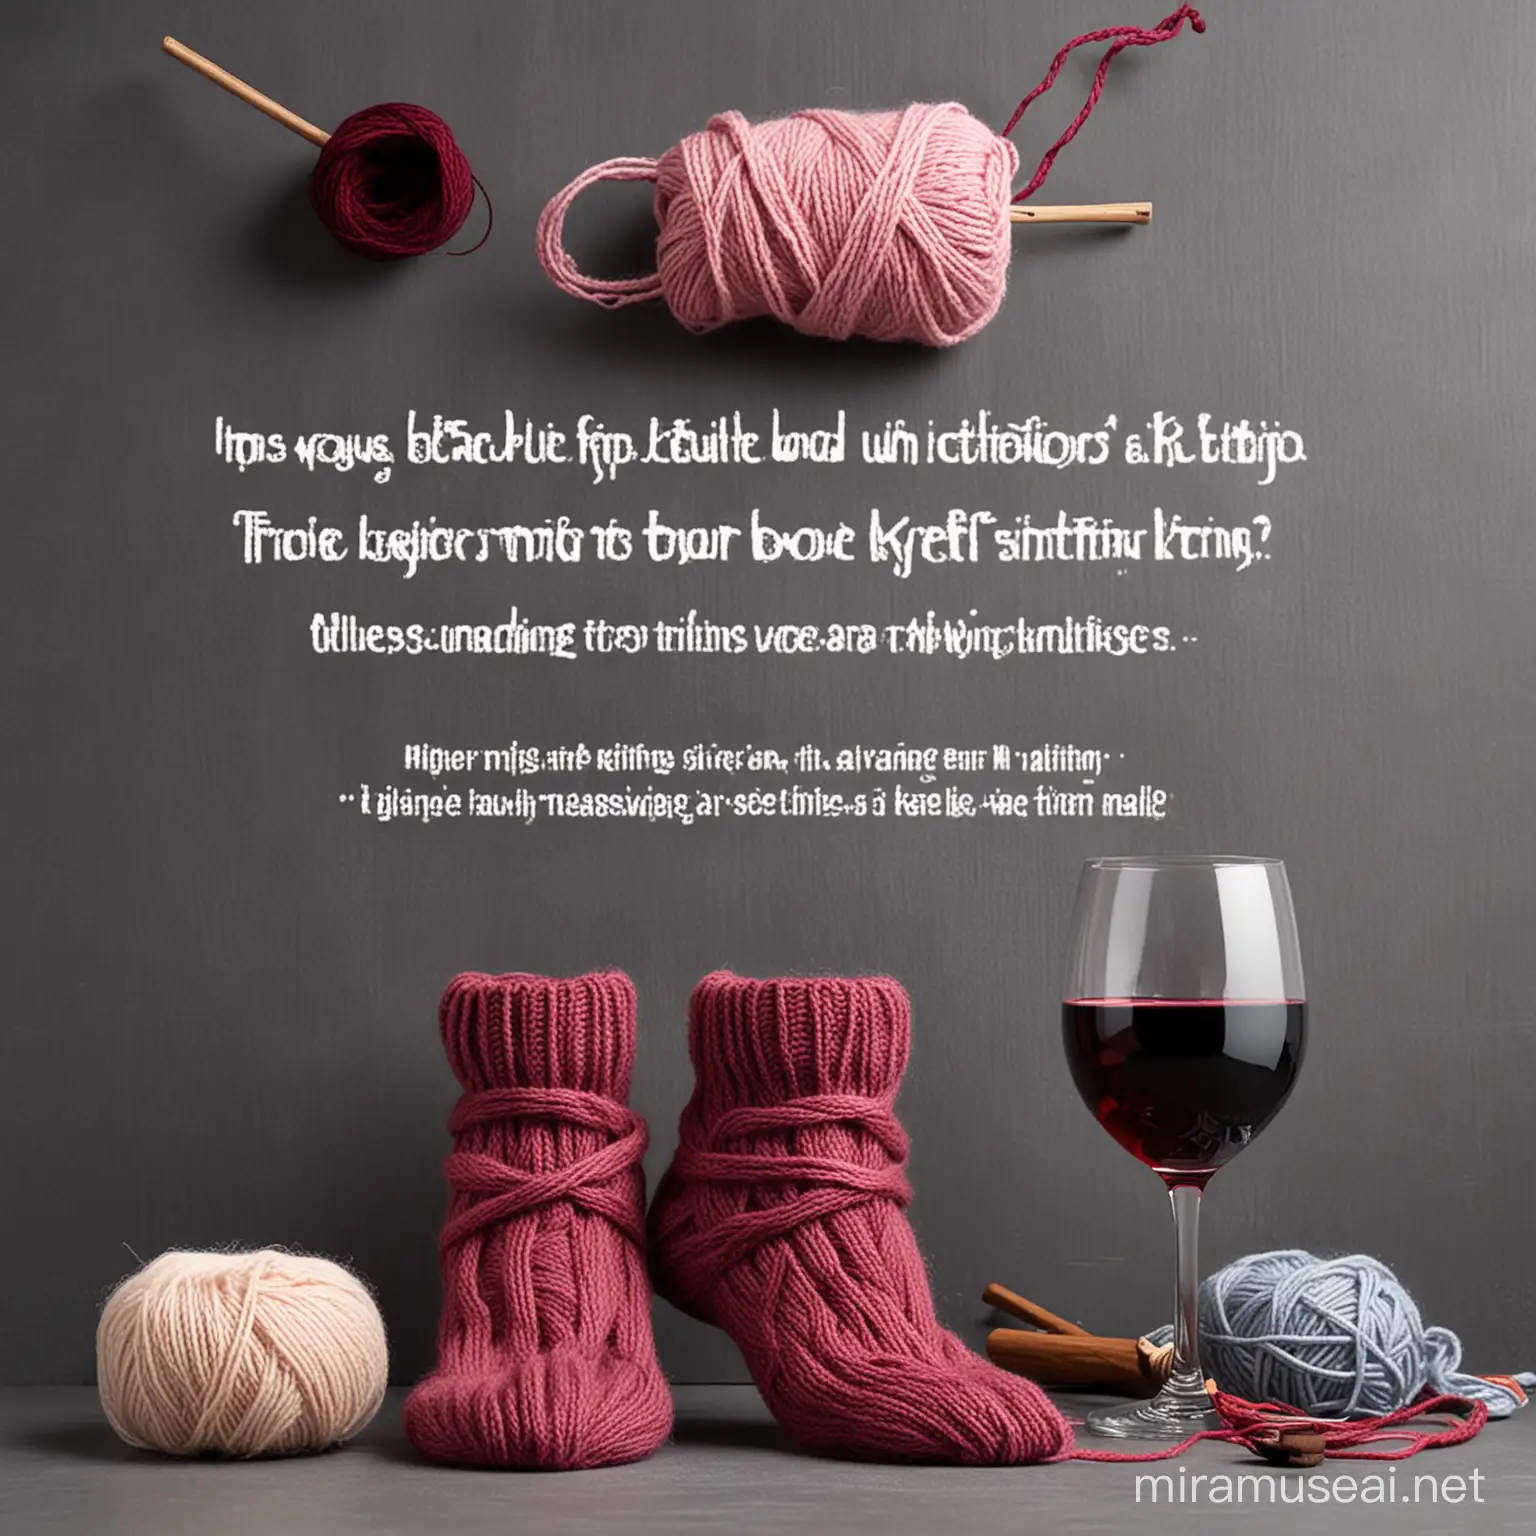 I need an image for facebook that looks like an invitation to a knitting with wine